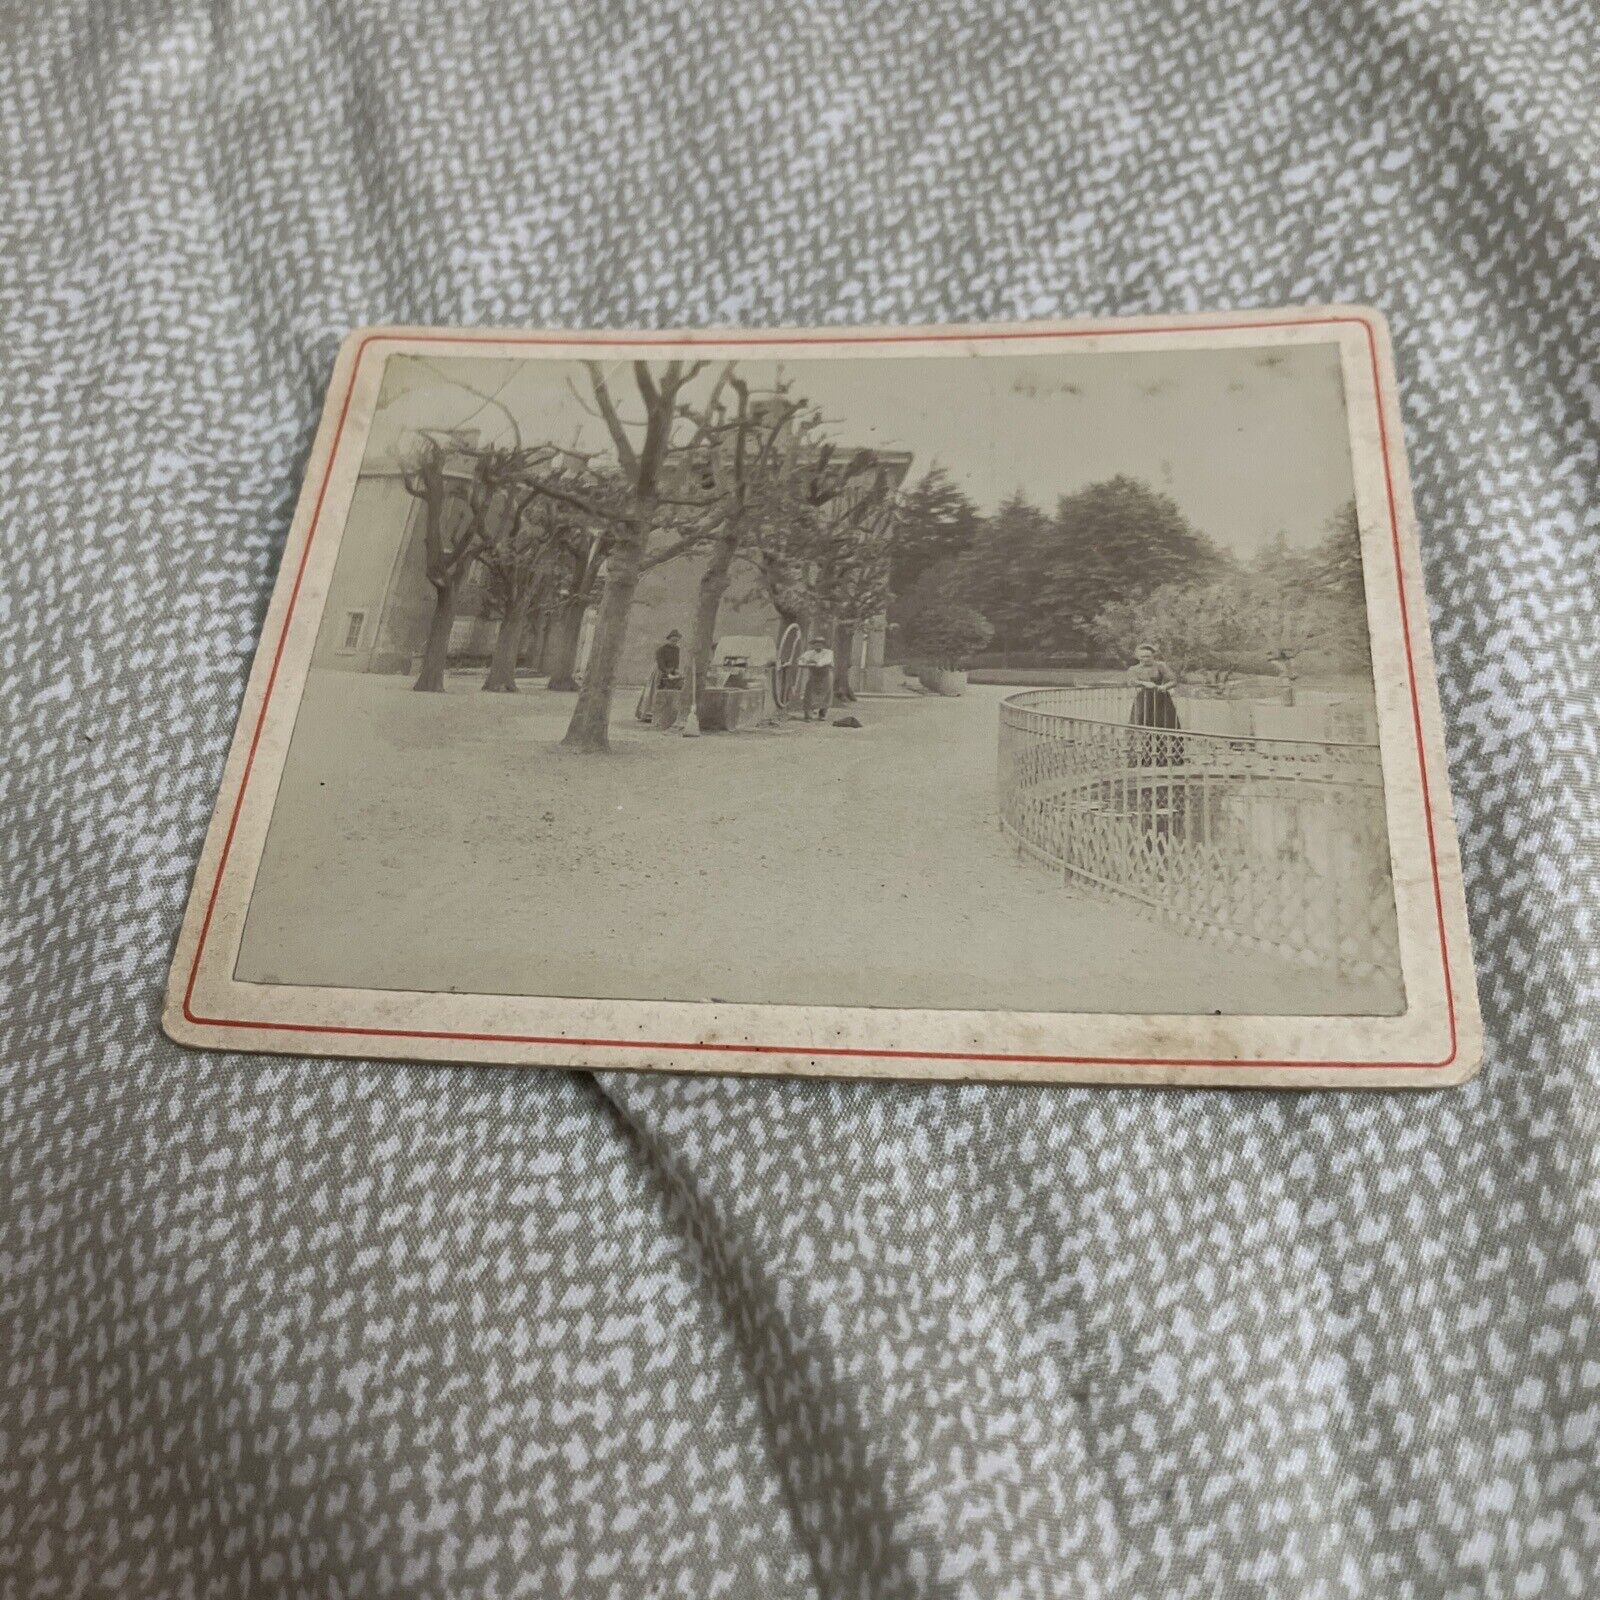 Antique Cabinet Card: Community Housing with Outdoor Laundry & Washing Station?